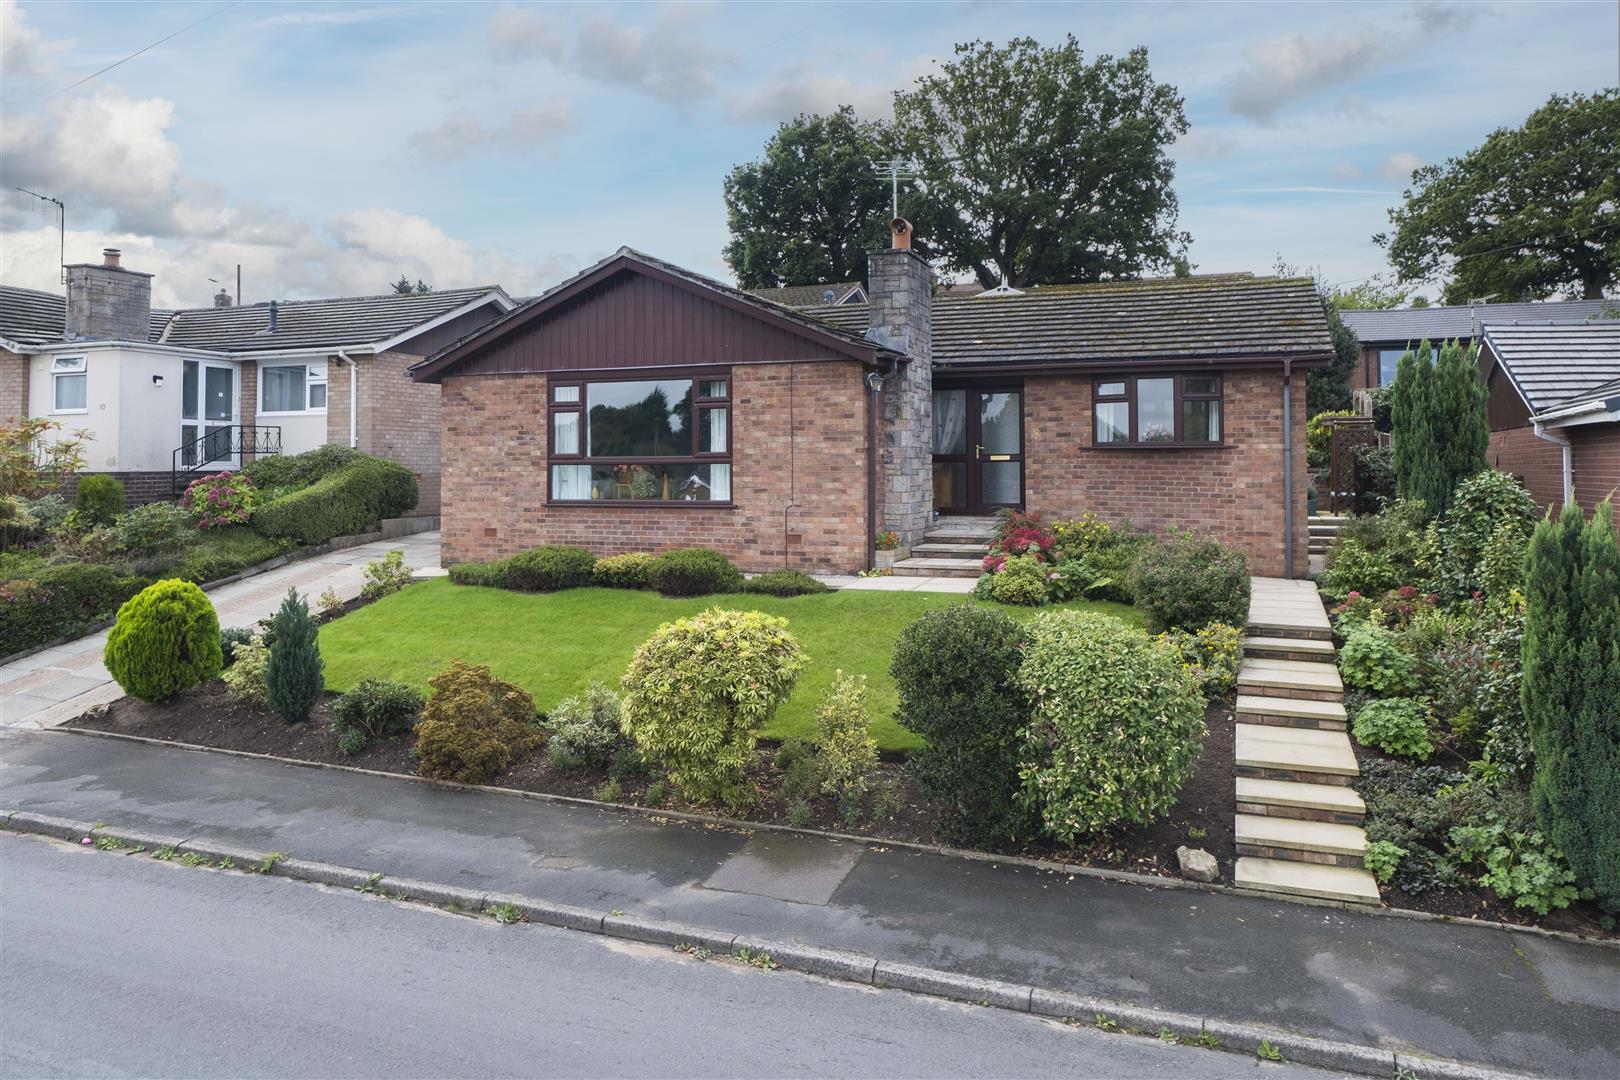 3 bedroom  Bungalow for Sale in Northwich